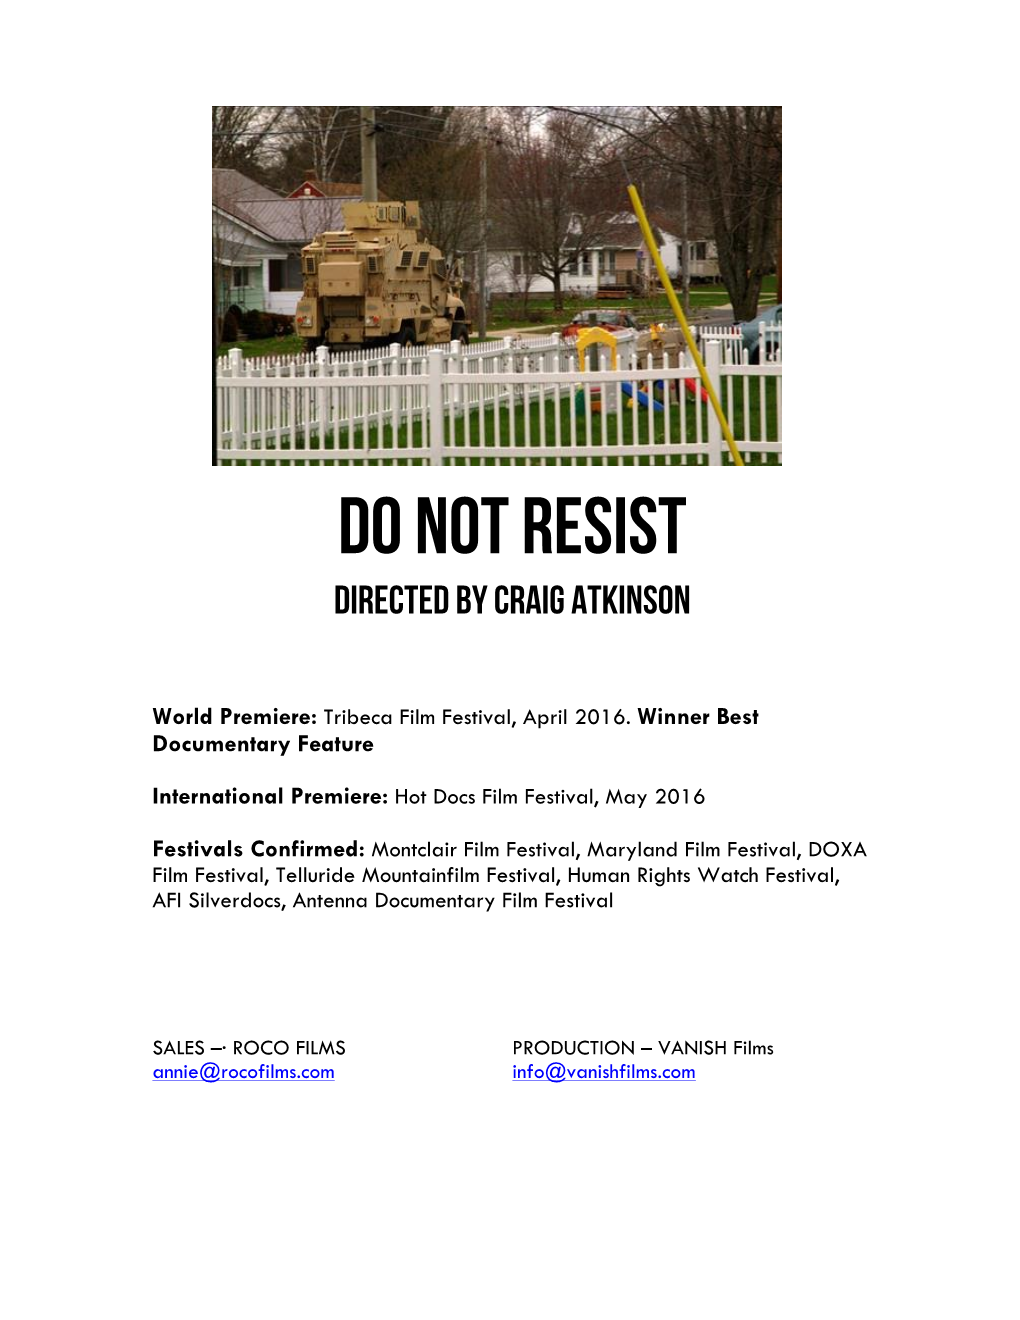 Do Not Resist Directed by Craig Atkinson